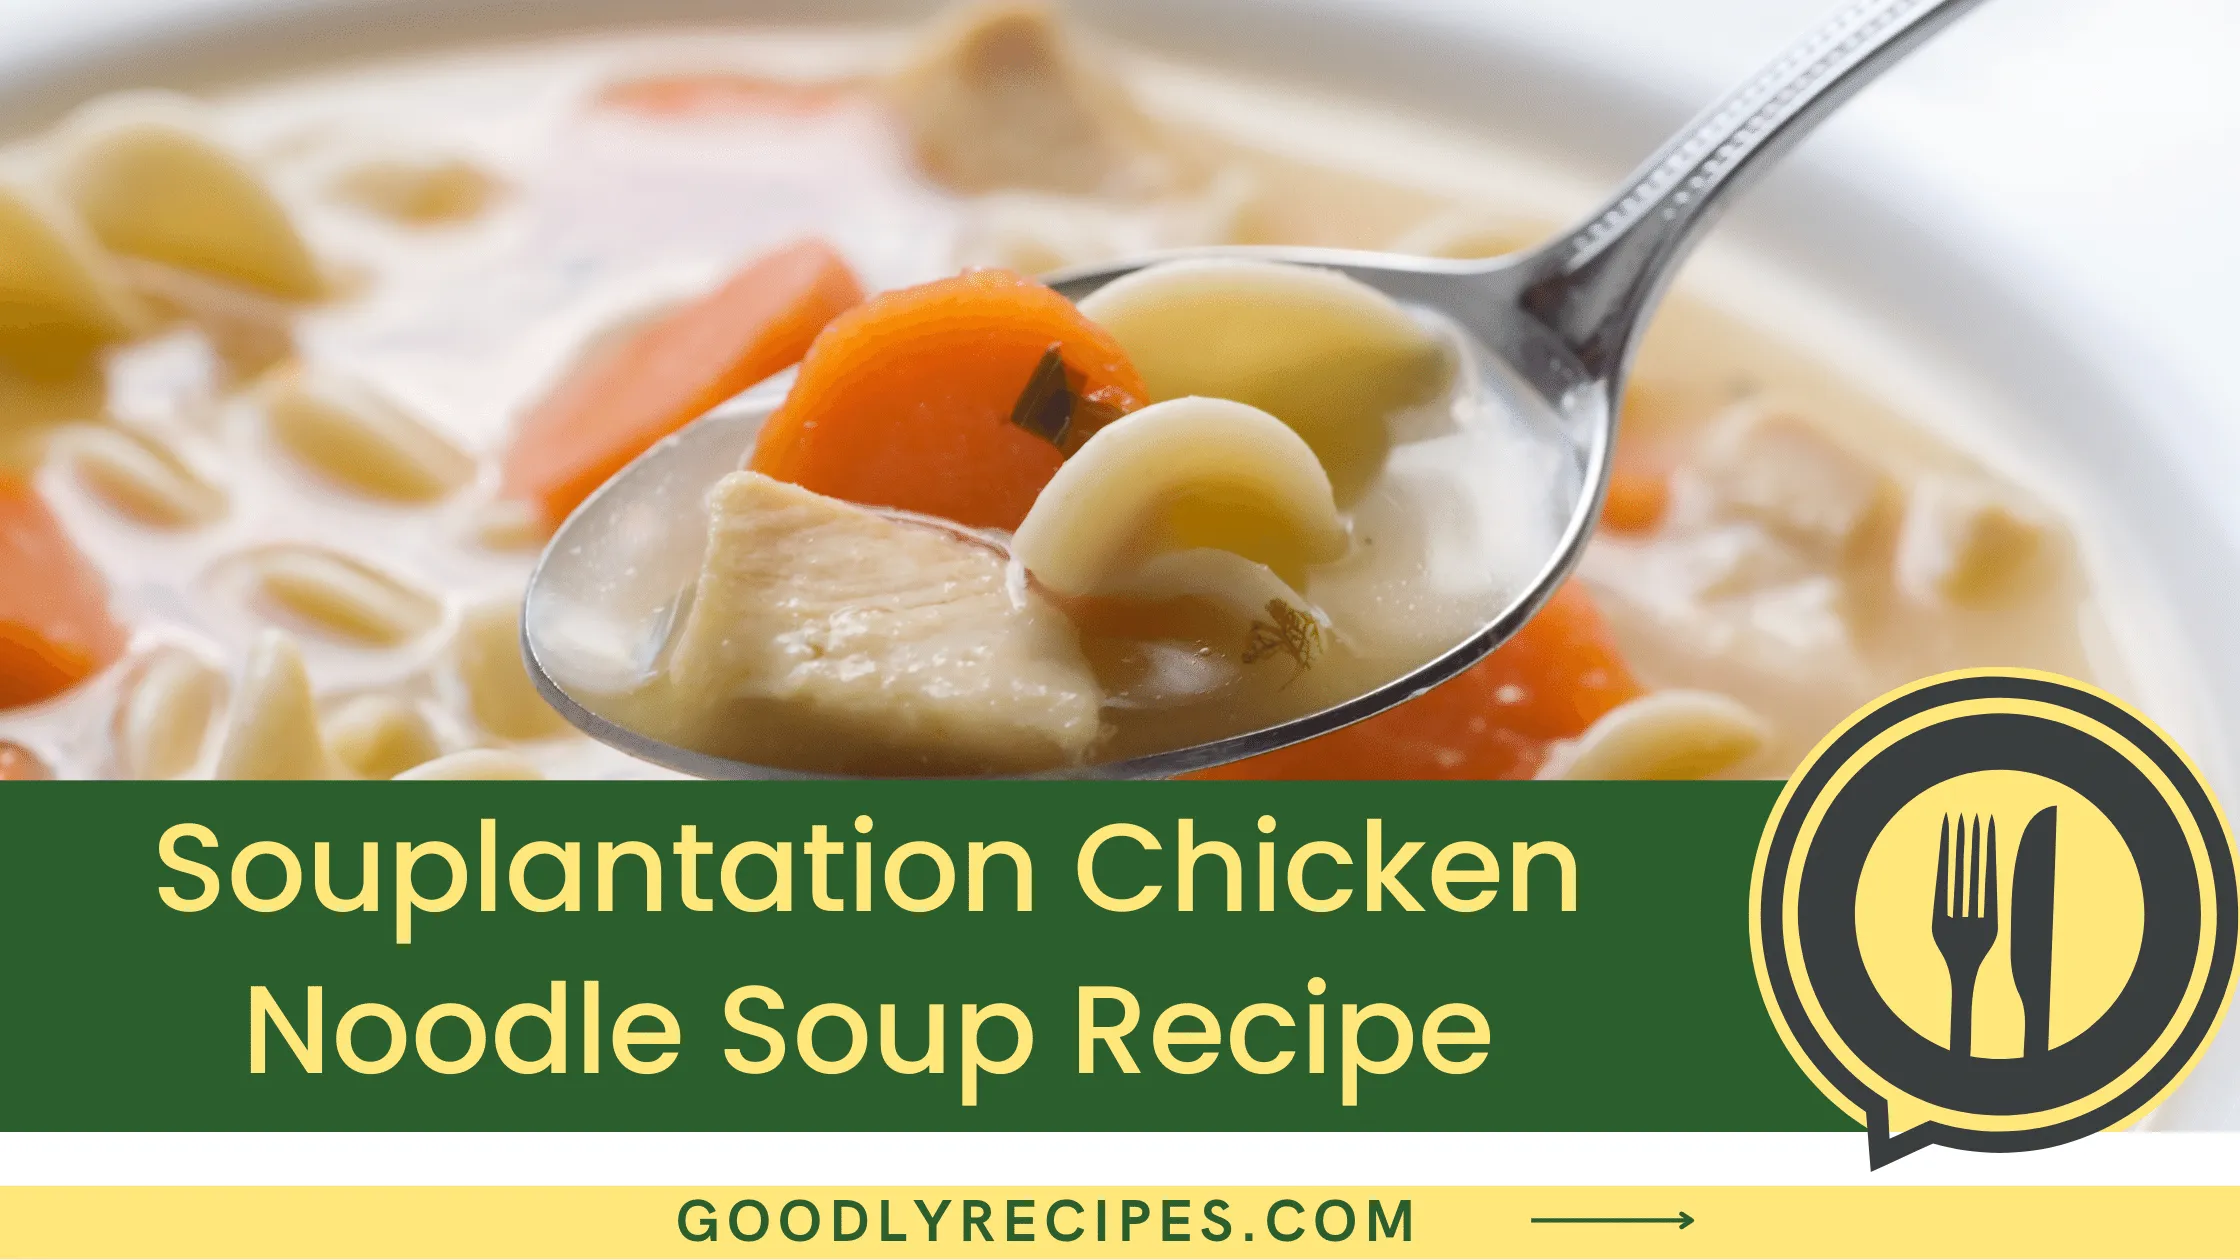 Souplantation Chicken Noodle Soup Recipe - For Food Lovers